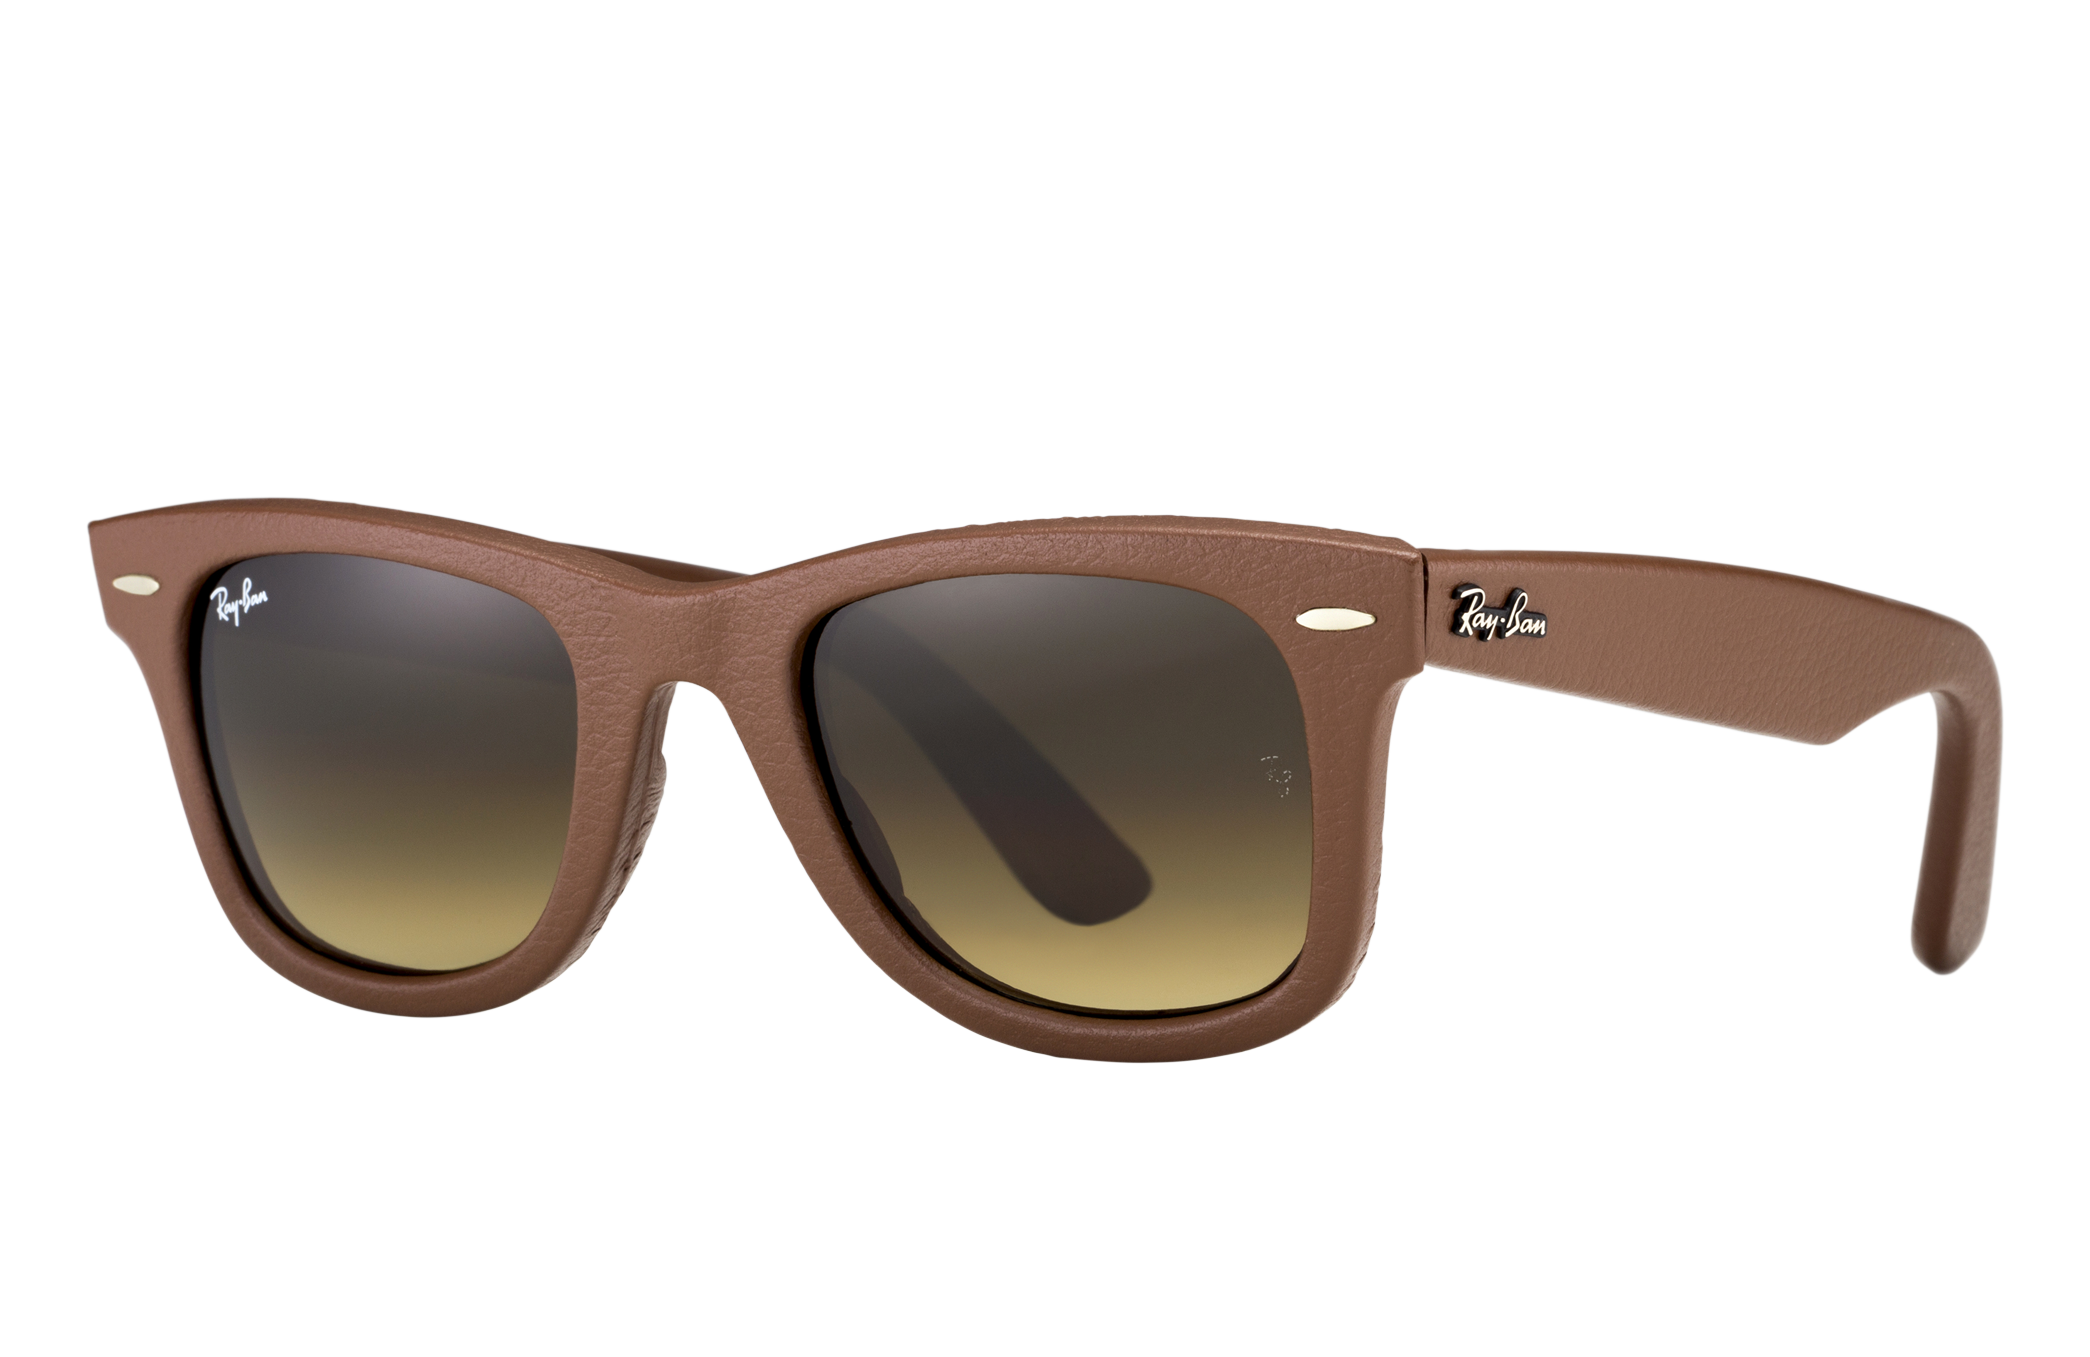 Arriba 90+ imagen ray ban sunglasses with leather frame